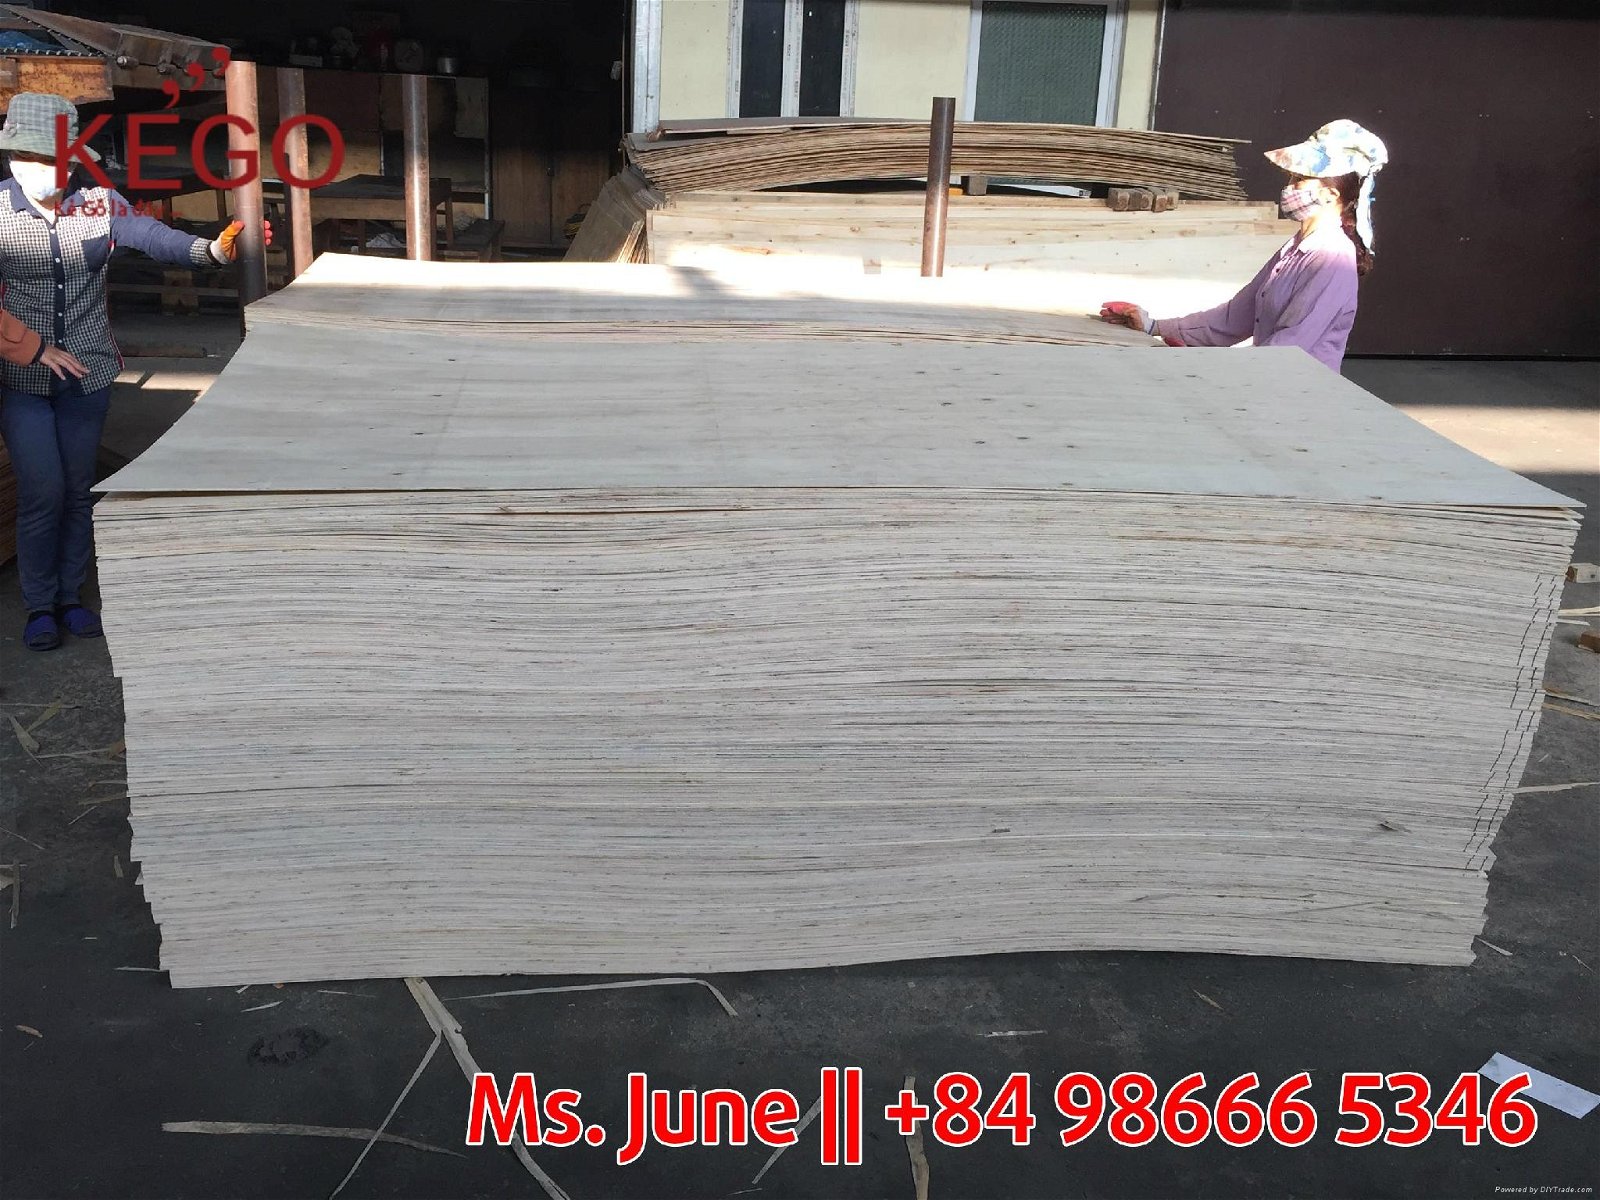 Commercial plywood - packing AB Grade from Vietnam